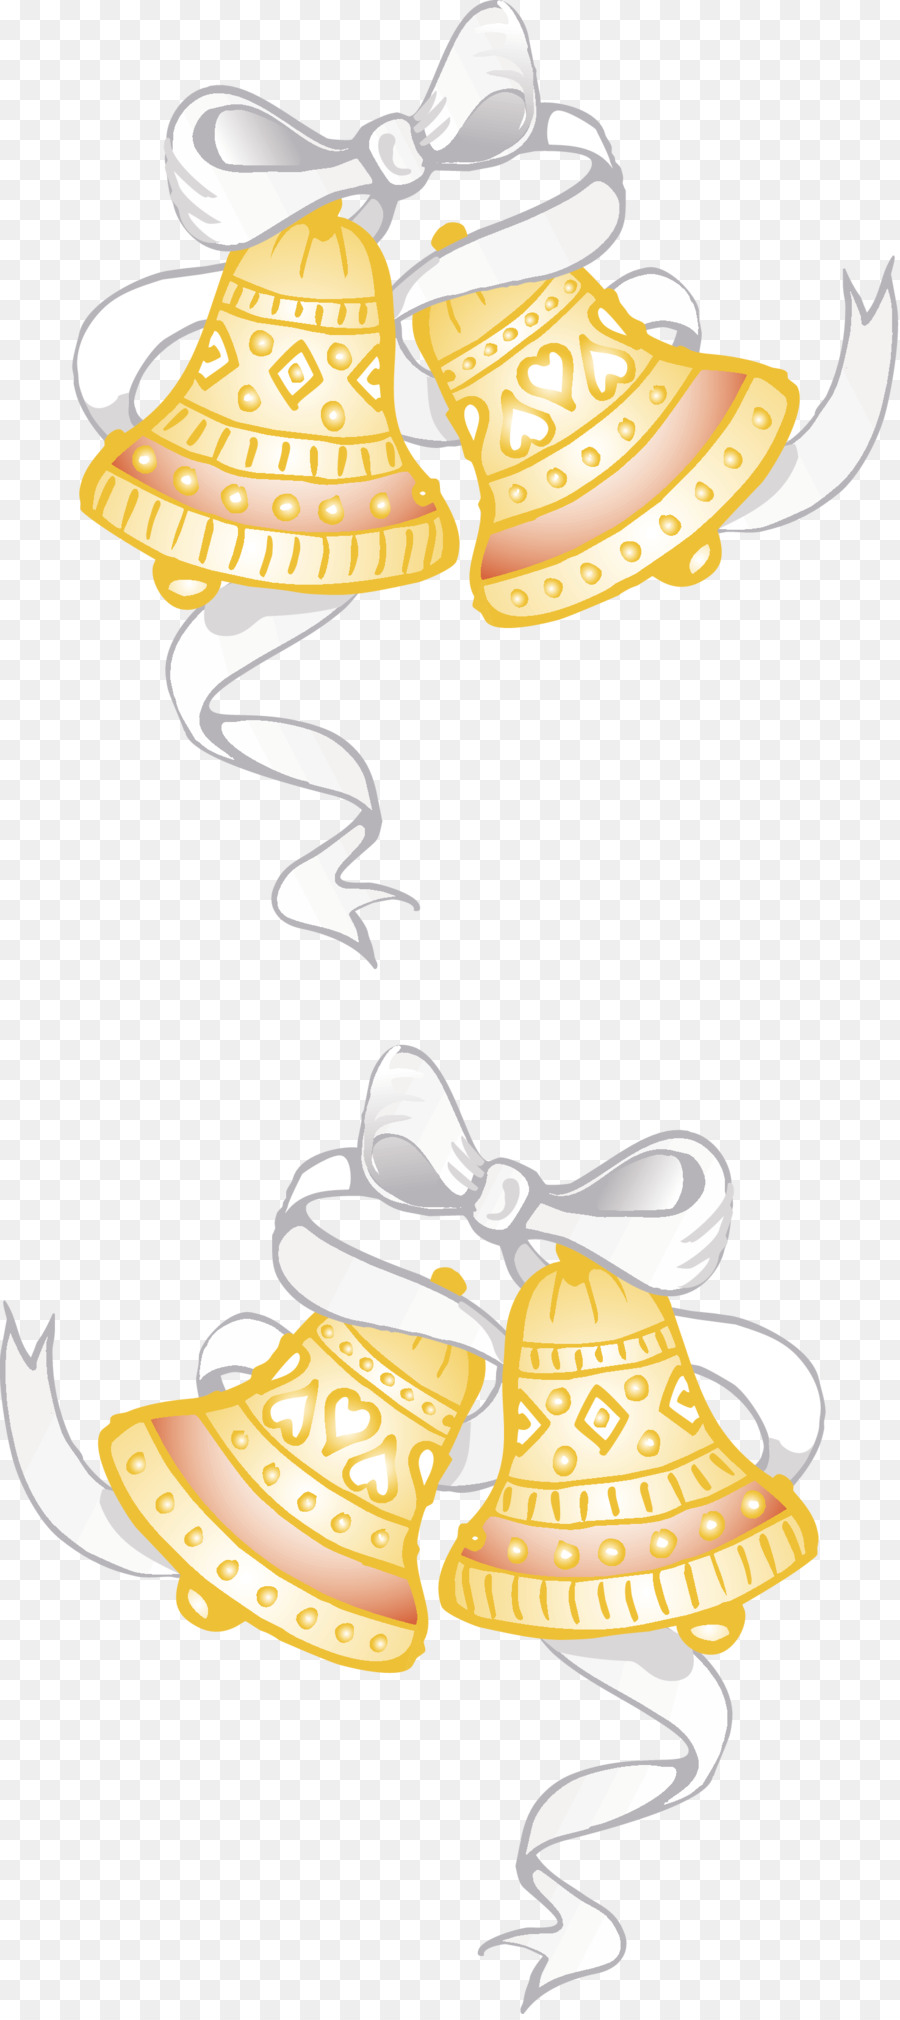 Wedding invitation Bell Clip art - 50th anniversary png download - 1475*3300 - Free Transparent Wedding Invitation png Download.